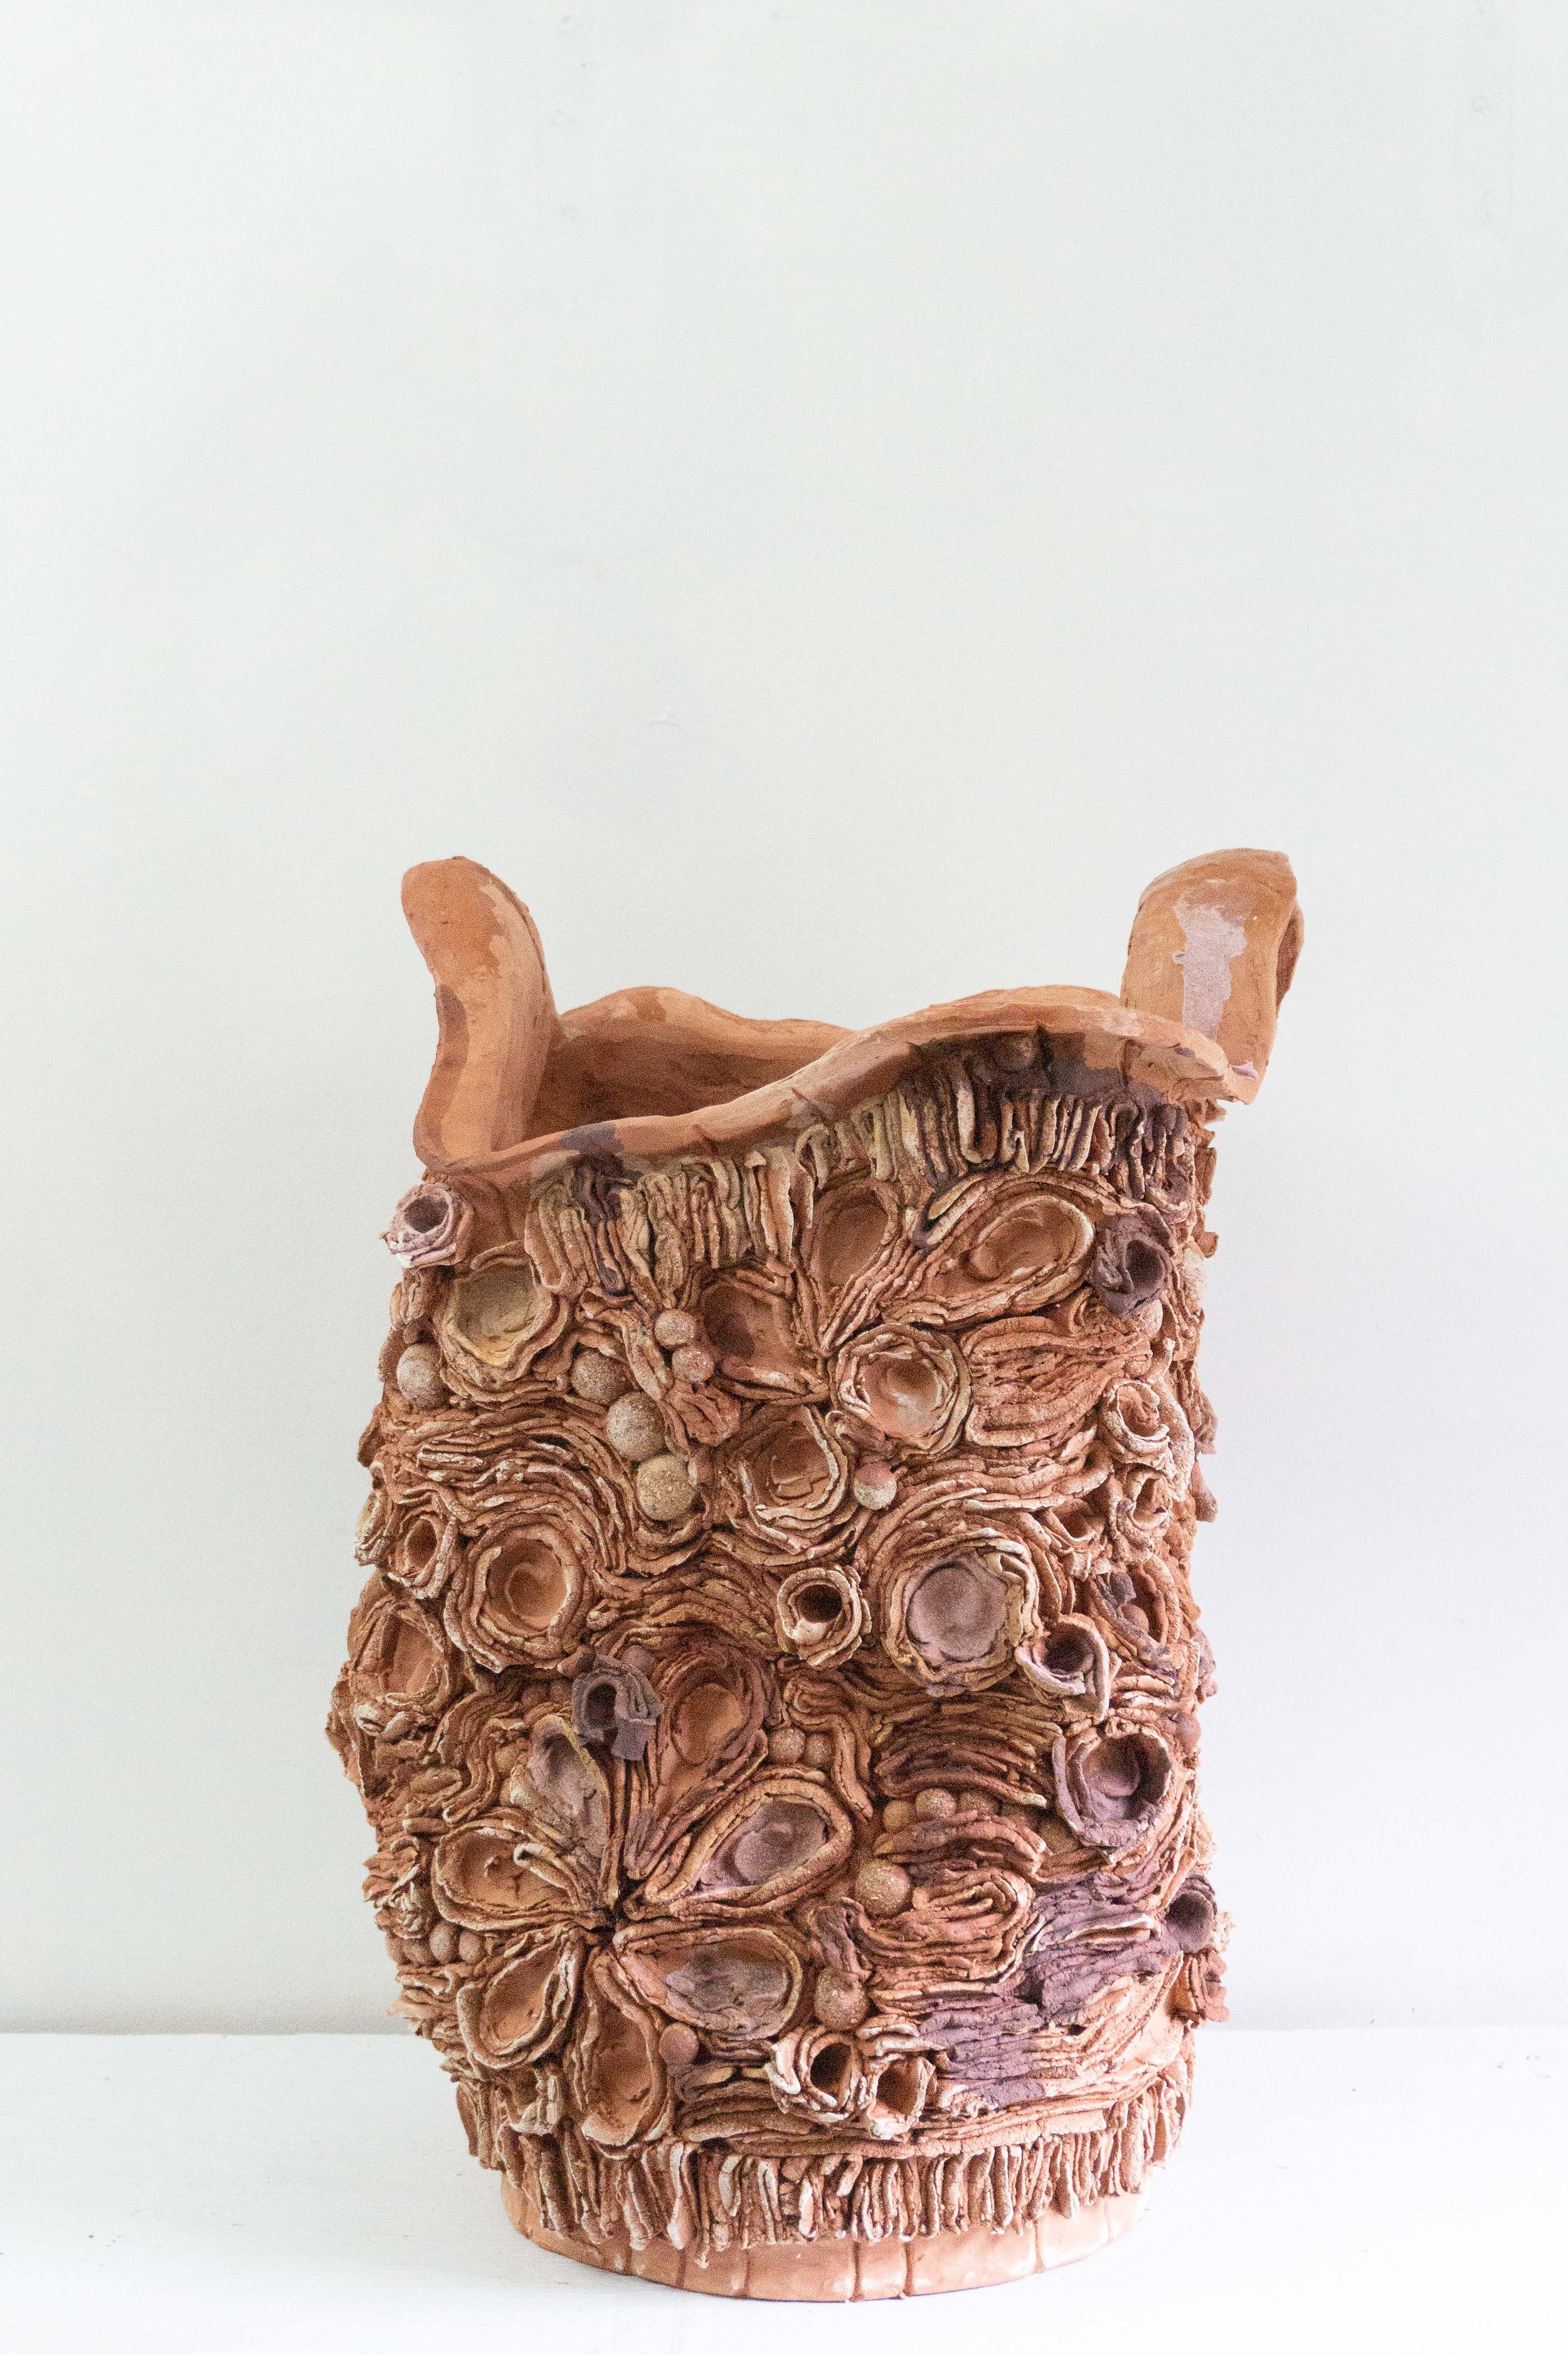  Bucket (Brick), 2022, earthenware, Bay of Fundy sand, oxides, Post-hole slip, wax 17” x 15” x 22”, SOLD 